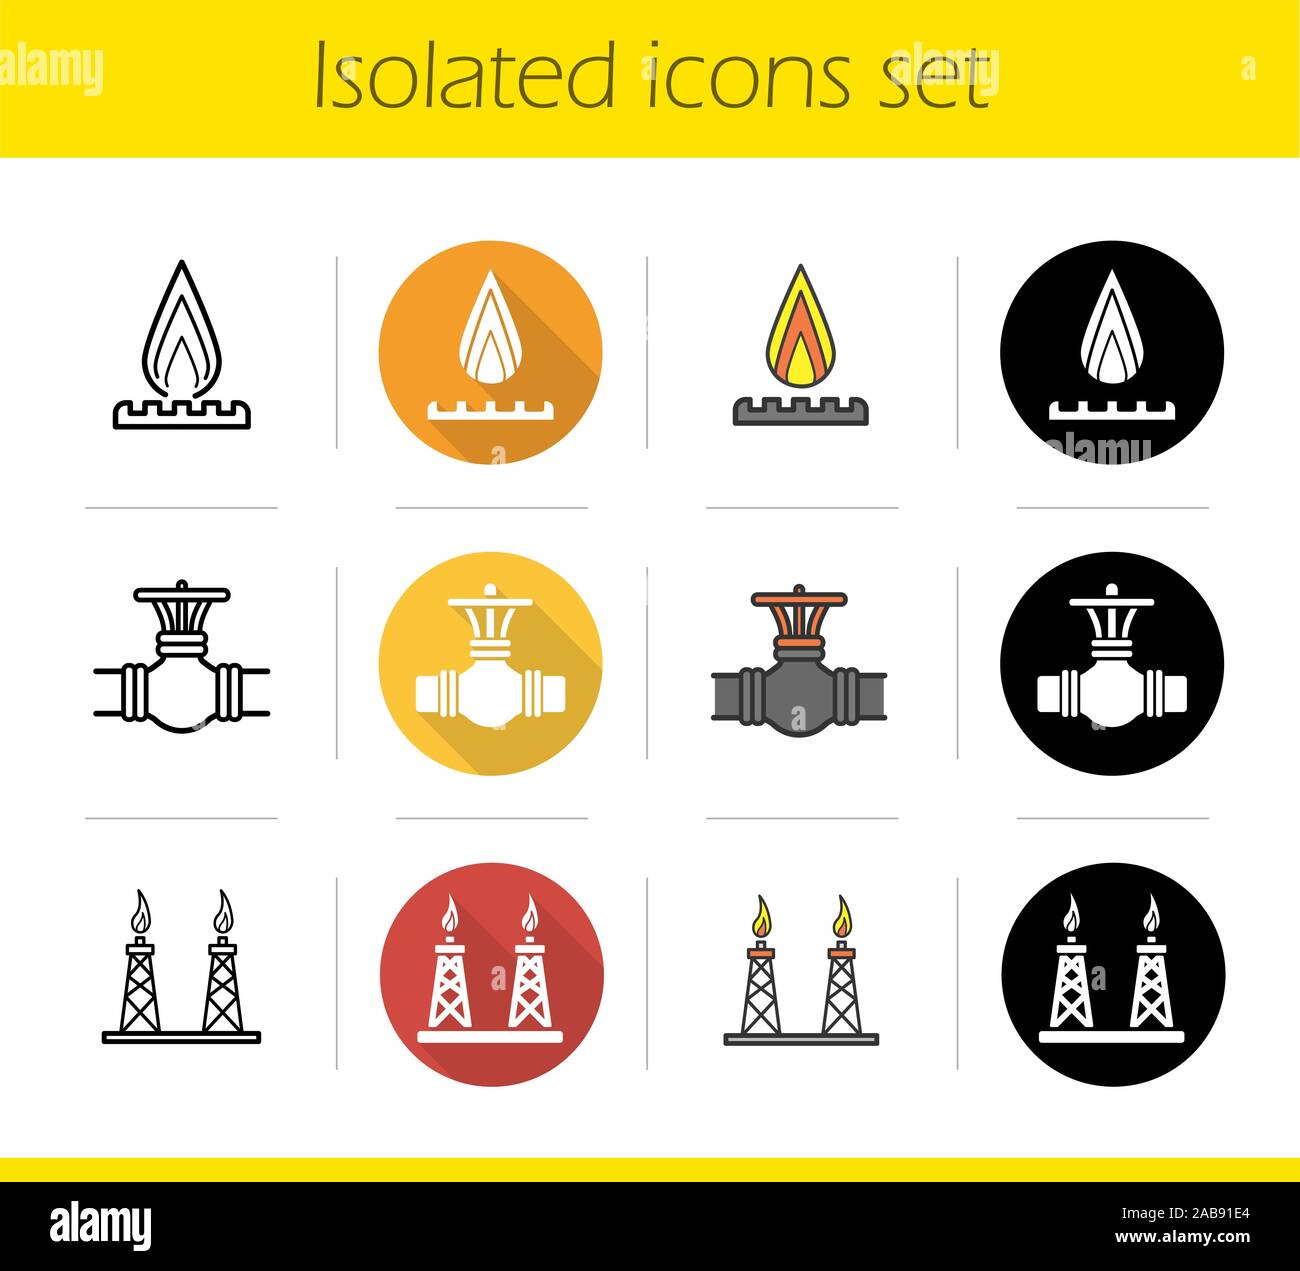 Gas industry icons set. Flat design, linear, black and color styles. Production platforms, pipe valve, gas burner symbol. Isolated vector illustration Stock Vector